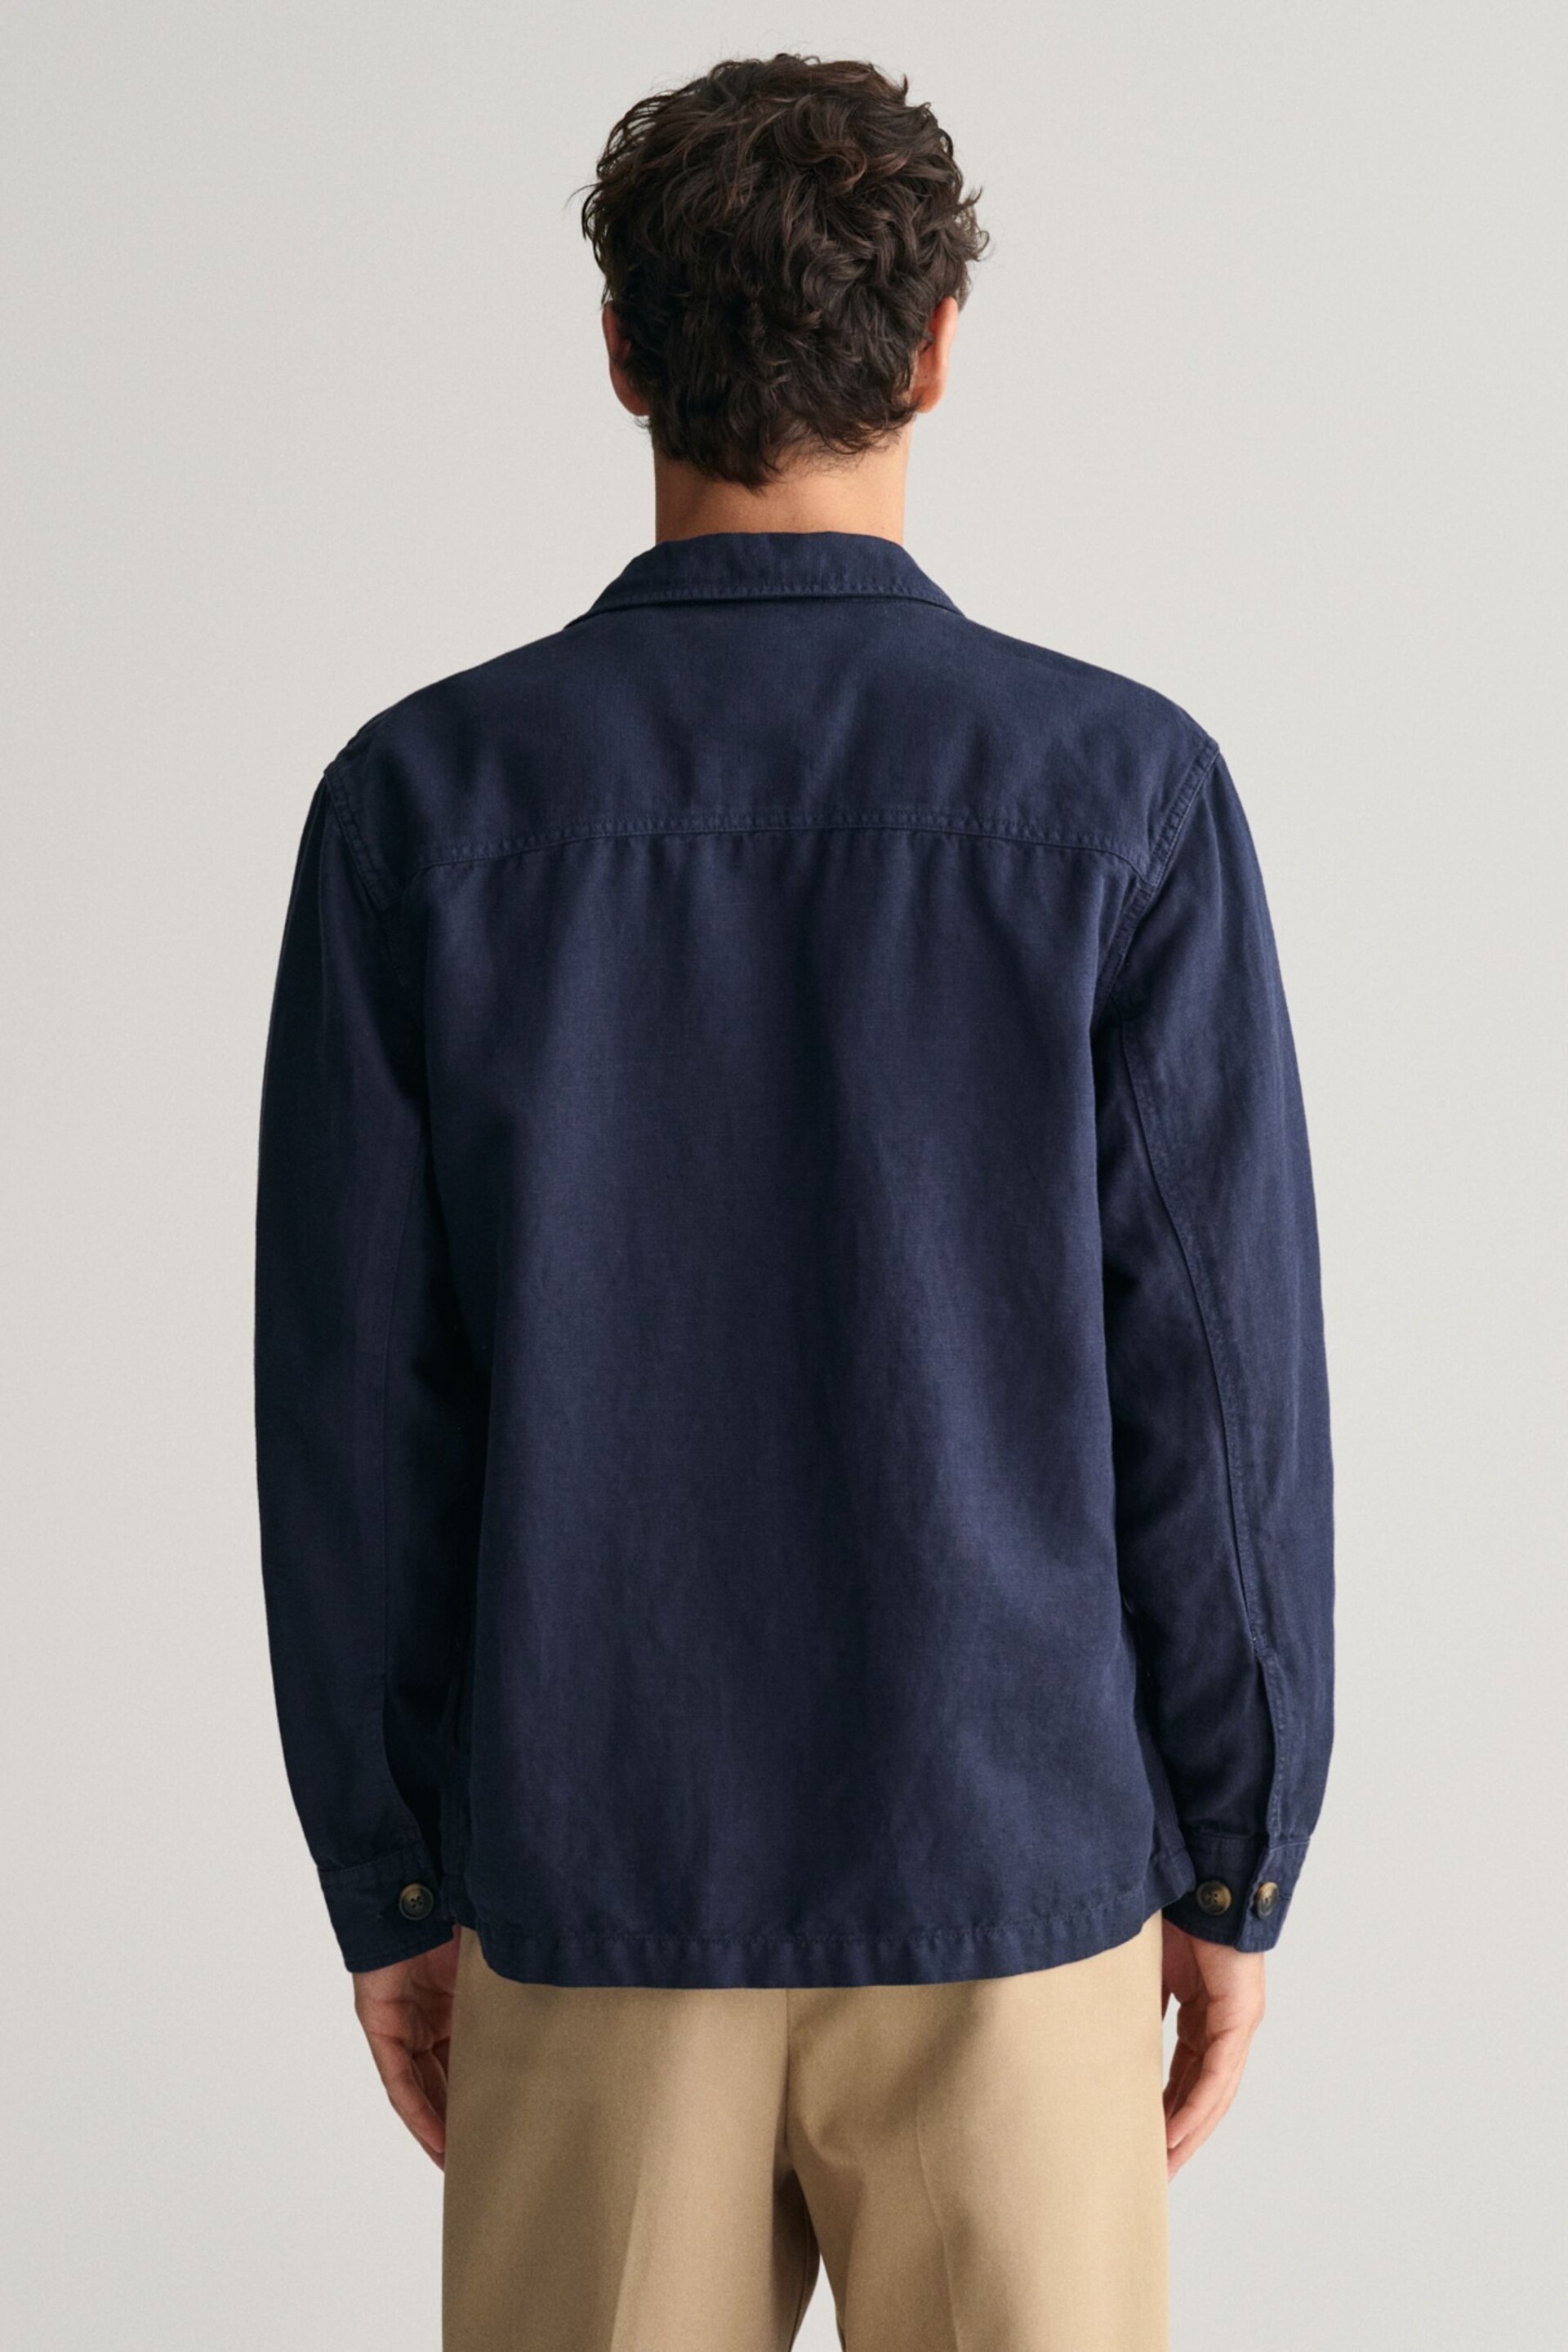 GANT Blue Relaxed Fit Cotton Linen Twill Overshirt - Image 2 of 7